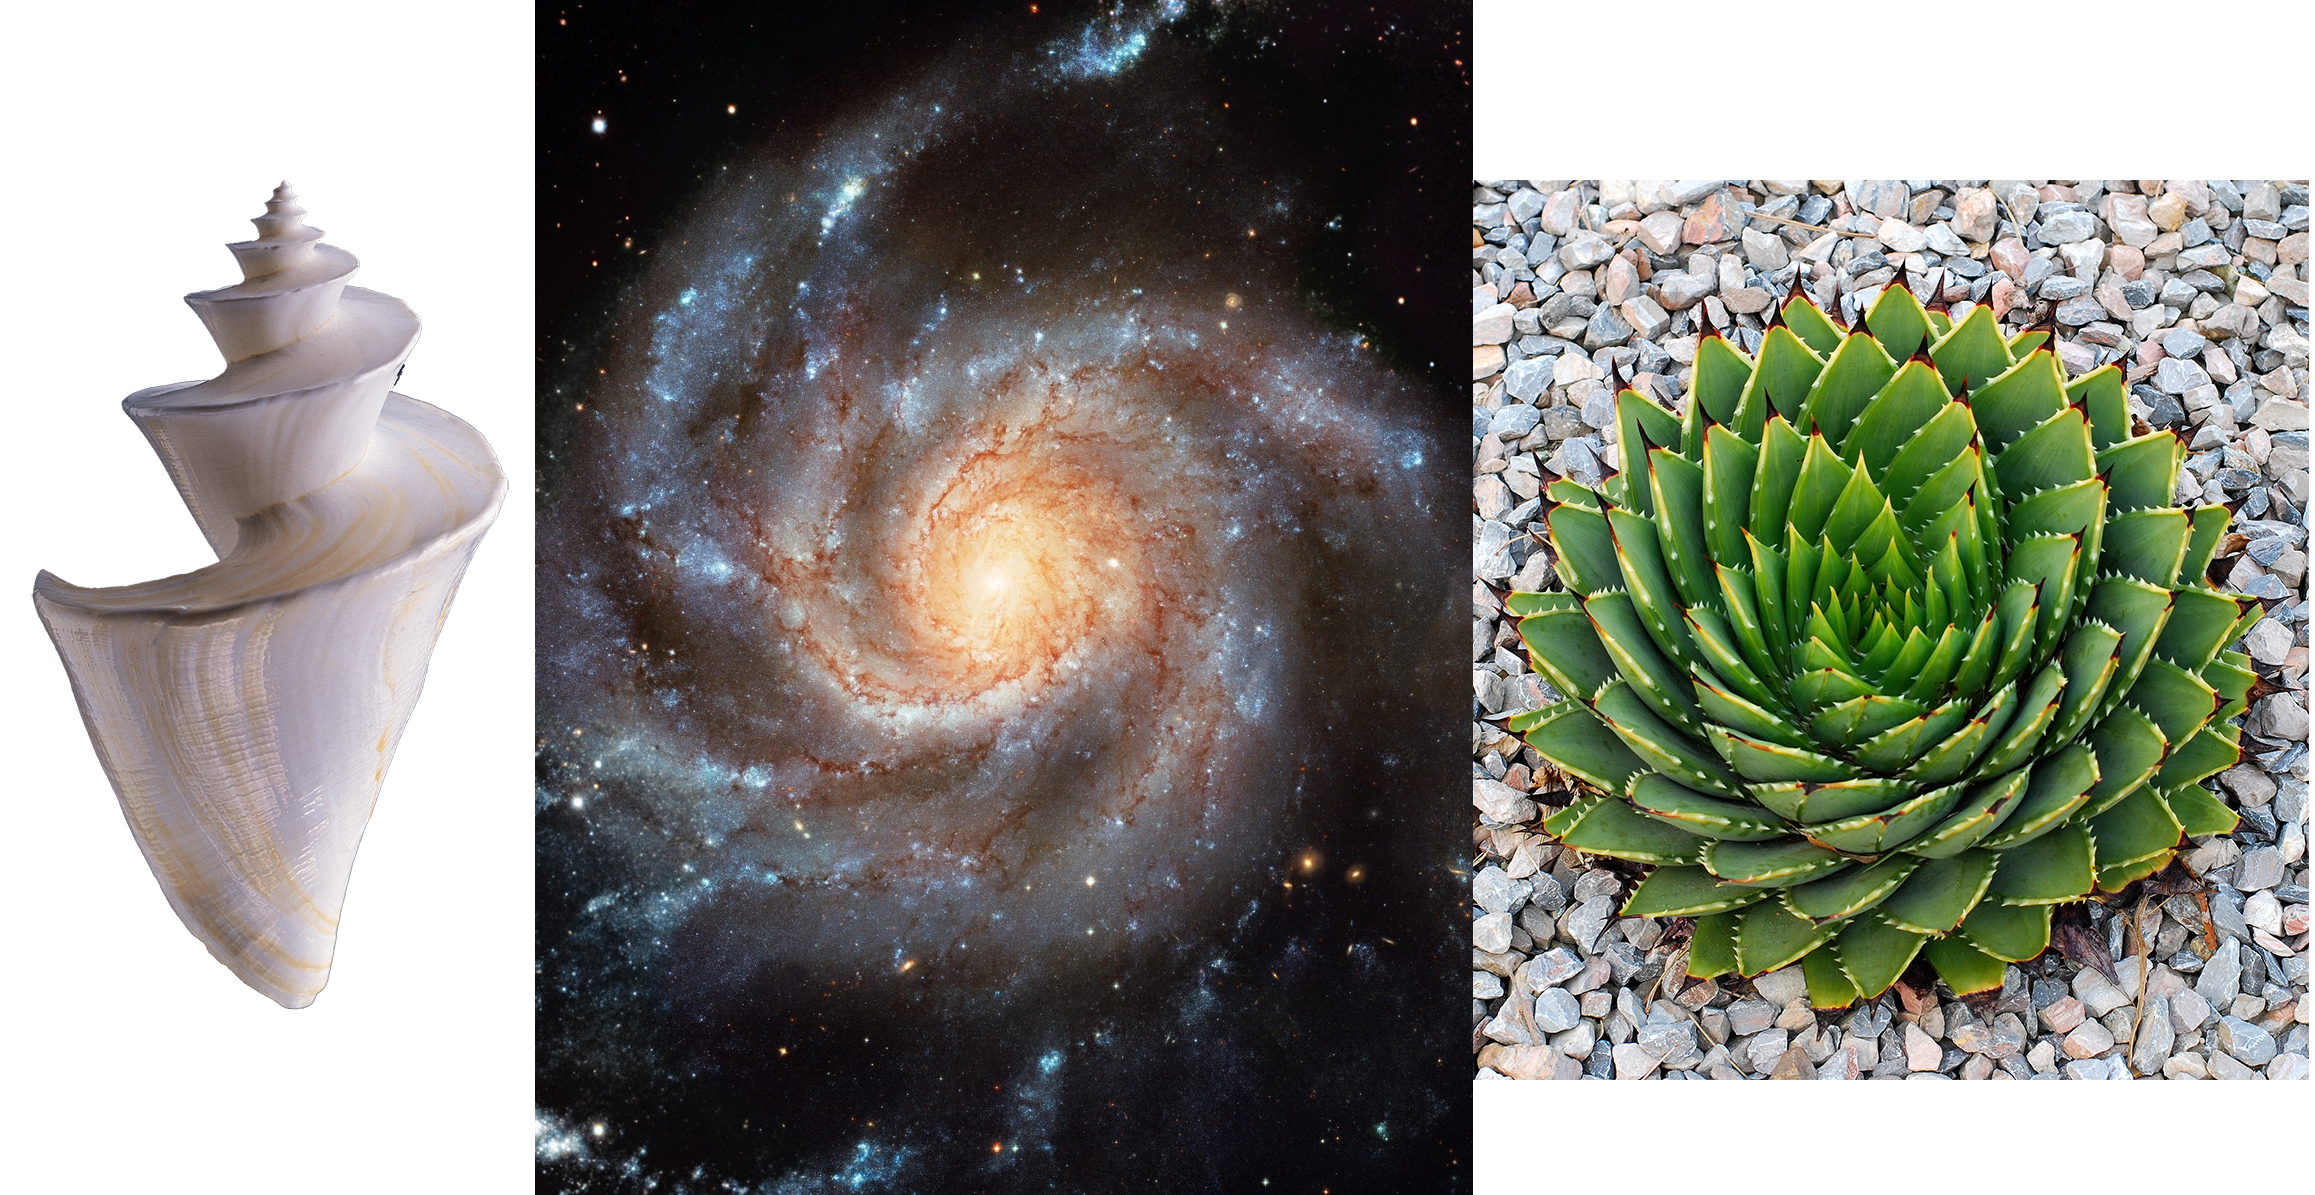 Spirals in nature, and the cosmos